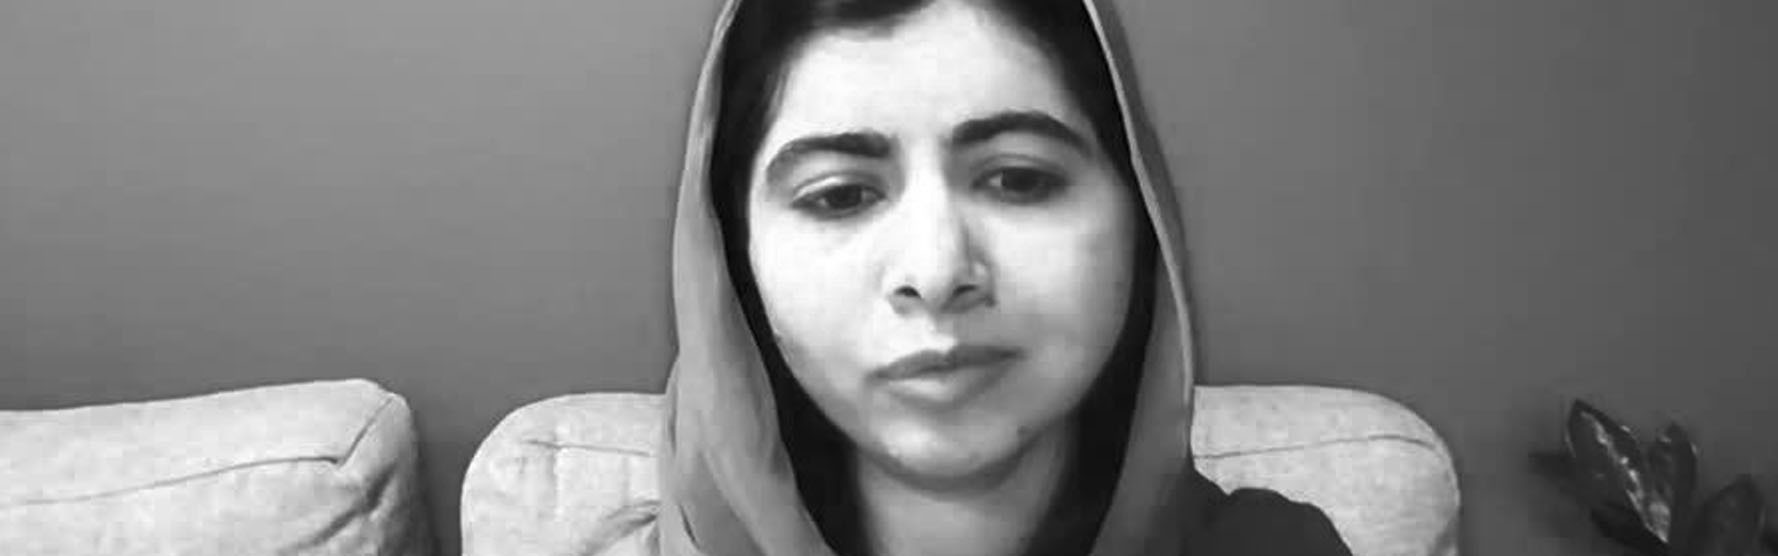 Reuters Report: 'We can't compromise on women's rights' - Malala